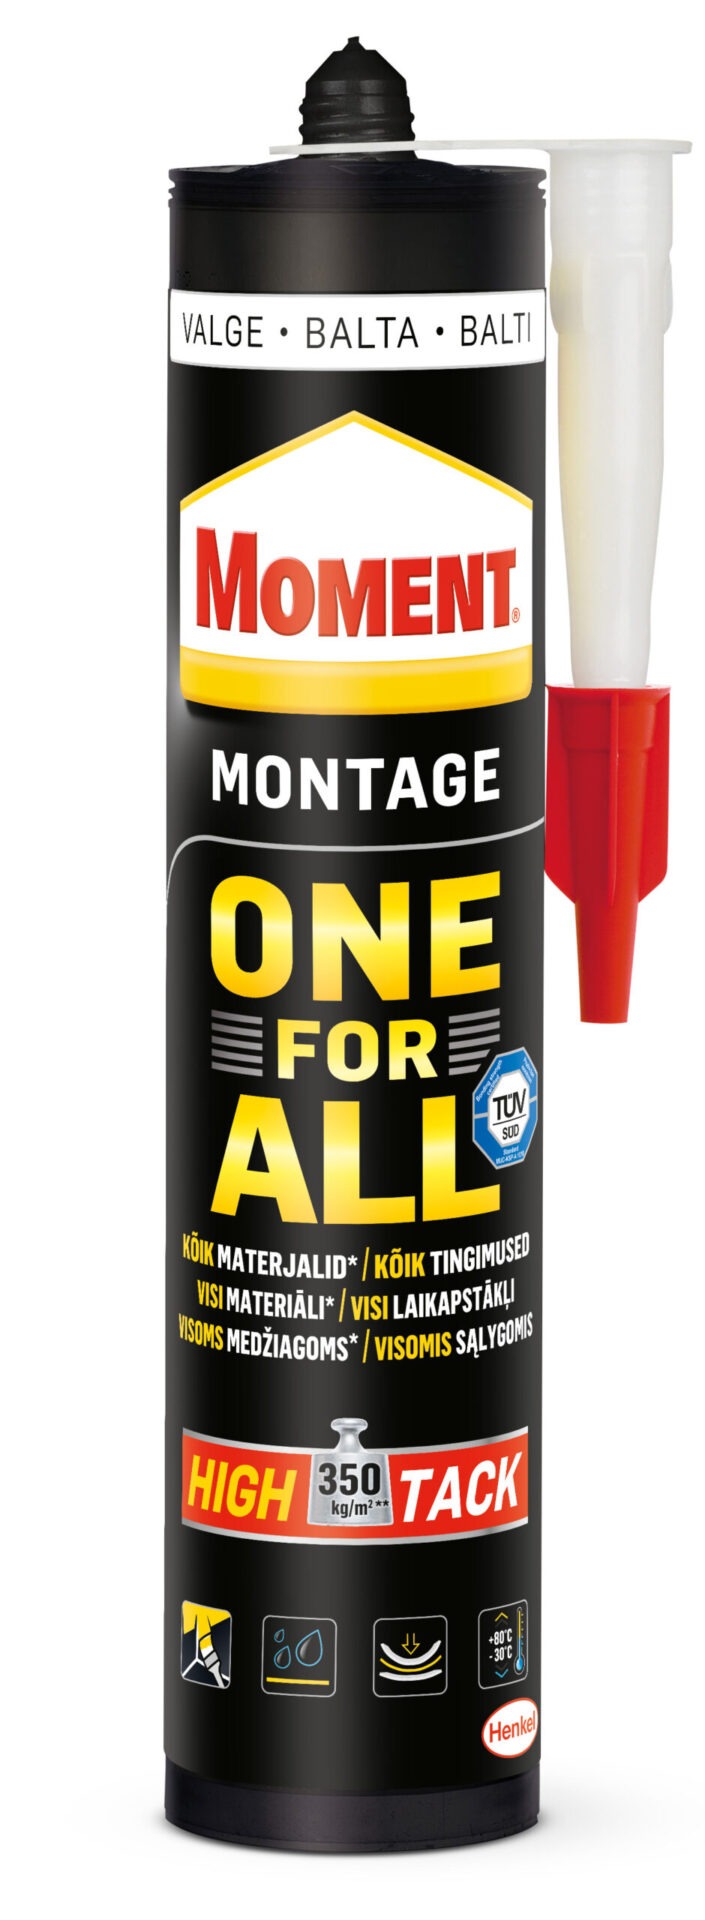 MONTAAŽILIIM MOMENT ONE FOR ALL HIGH TACK 440g